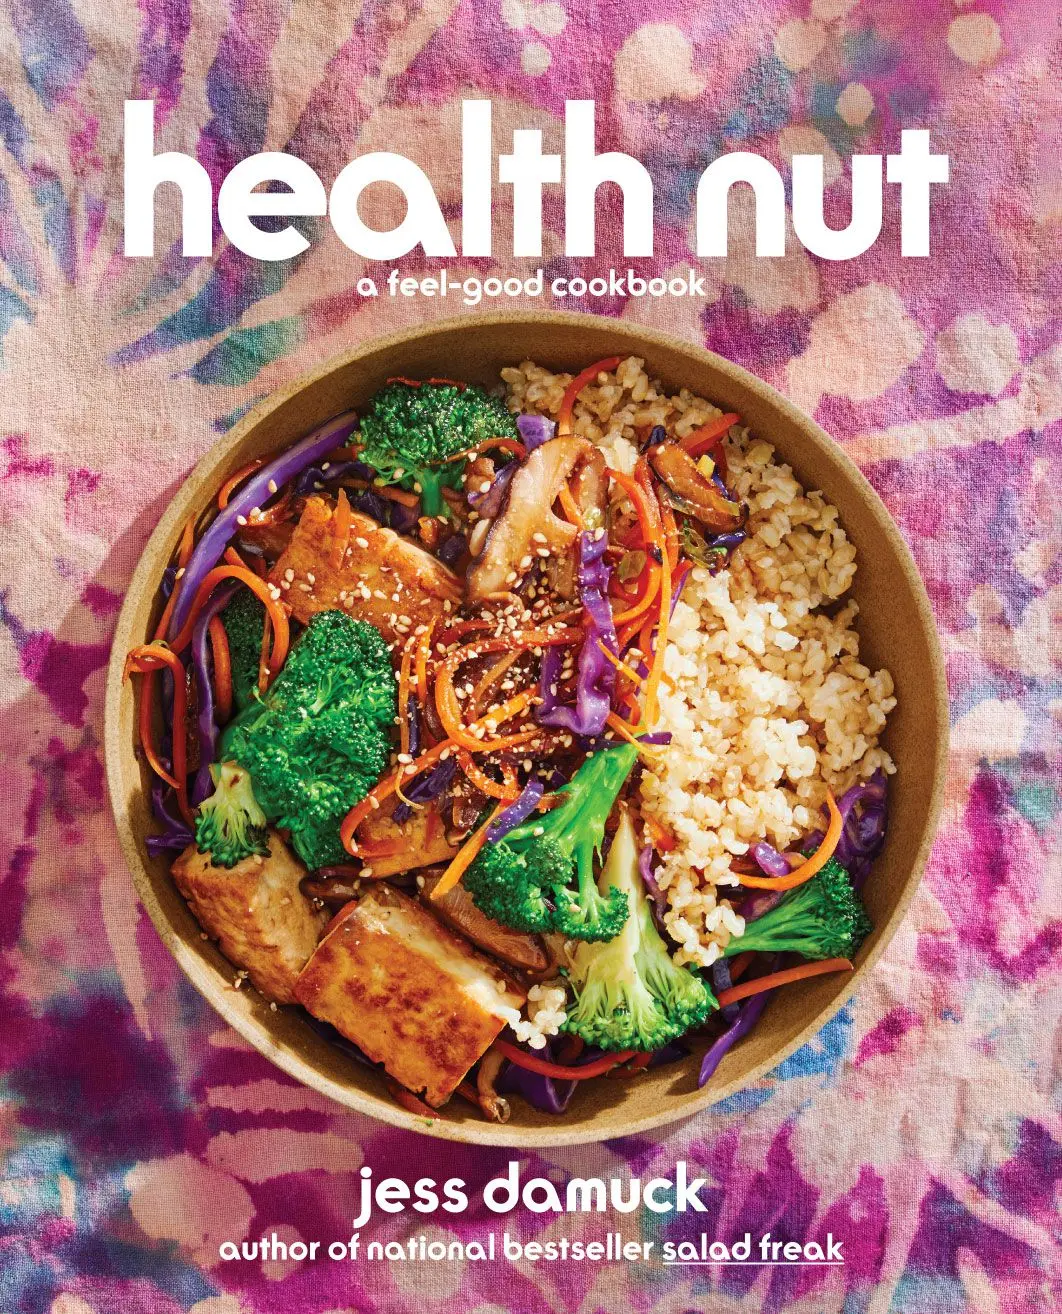 The cover of Health Nut